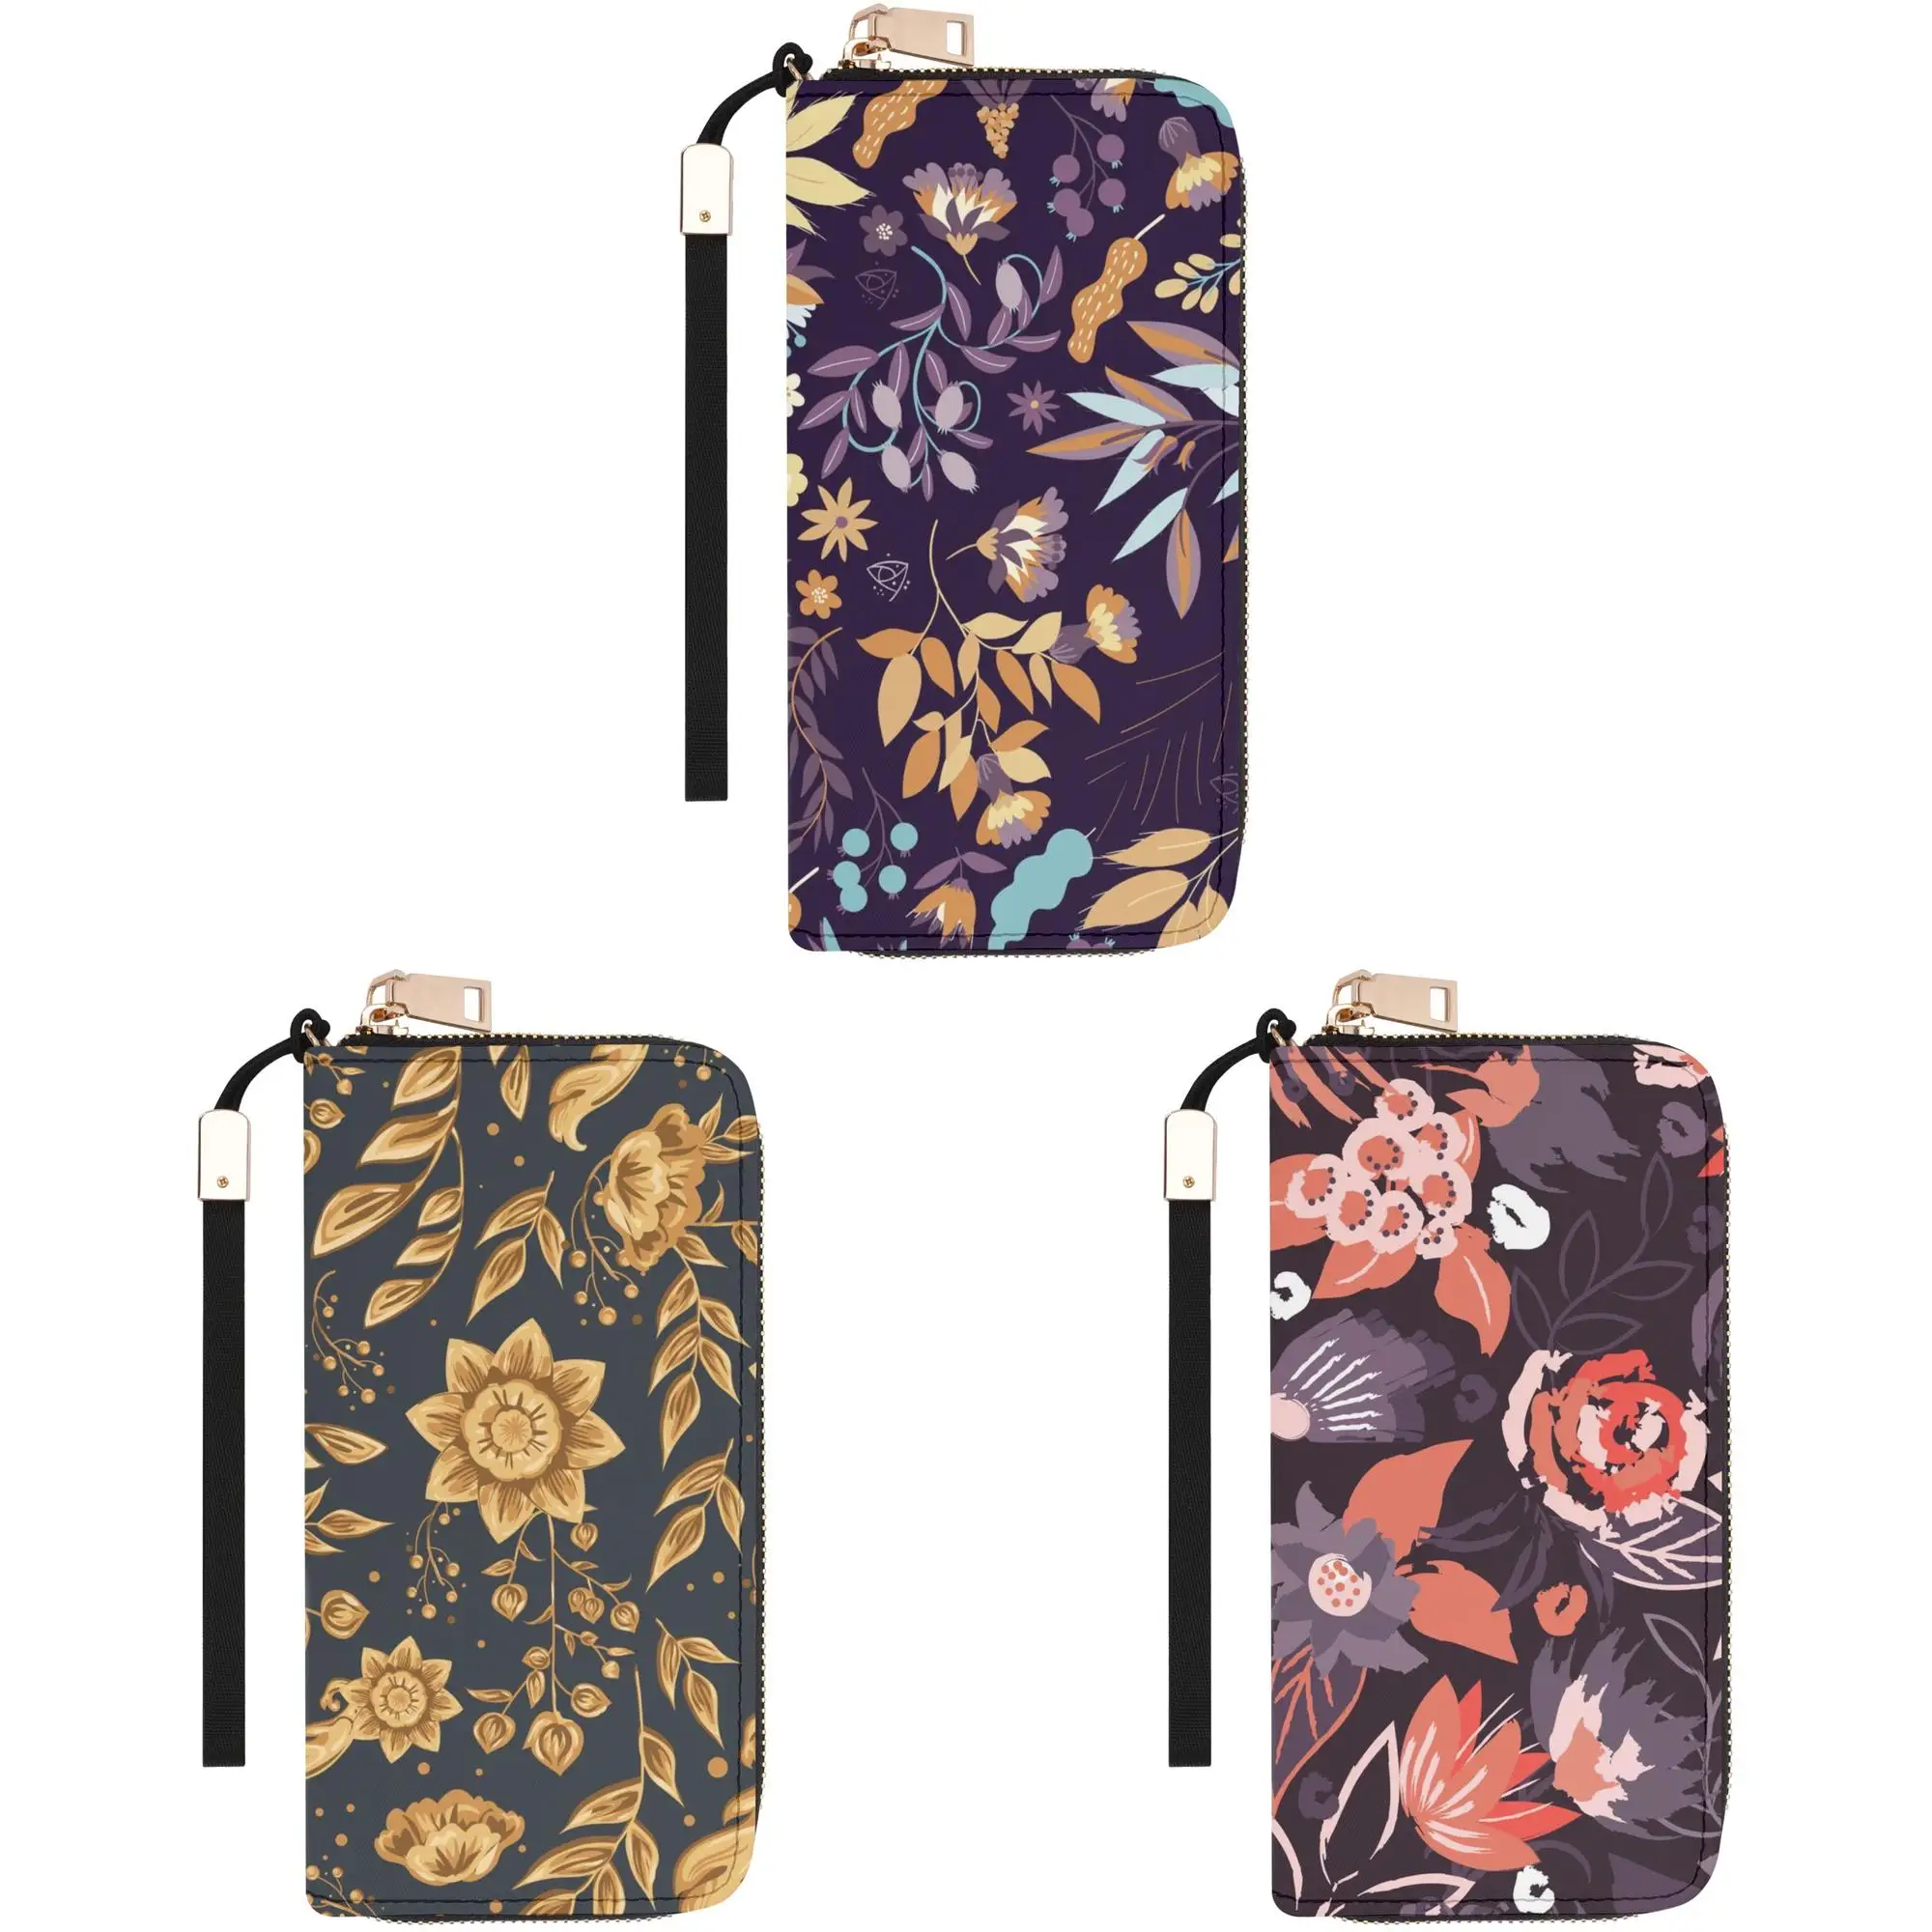 

Moody Florals Luxury Vegan Leather Long Women Wallets Big Size Coin Purse Phone Clutch For Everyday Use